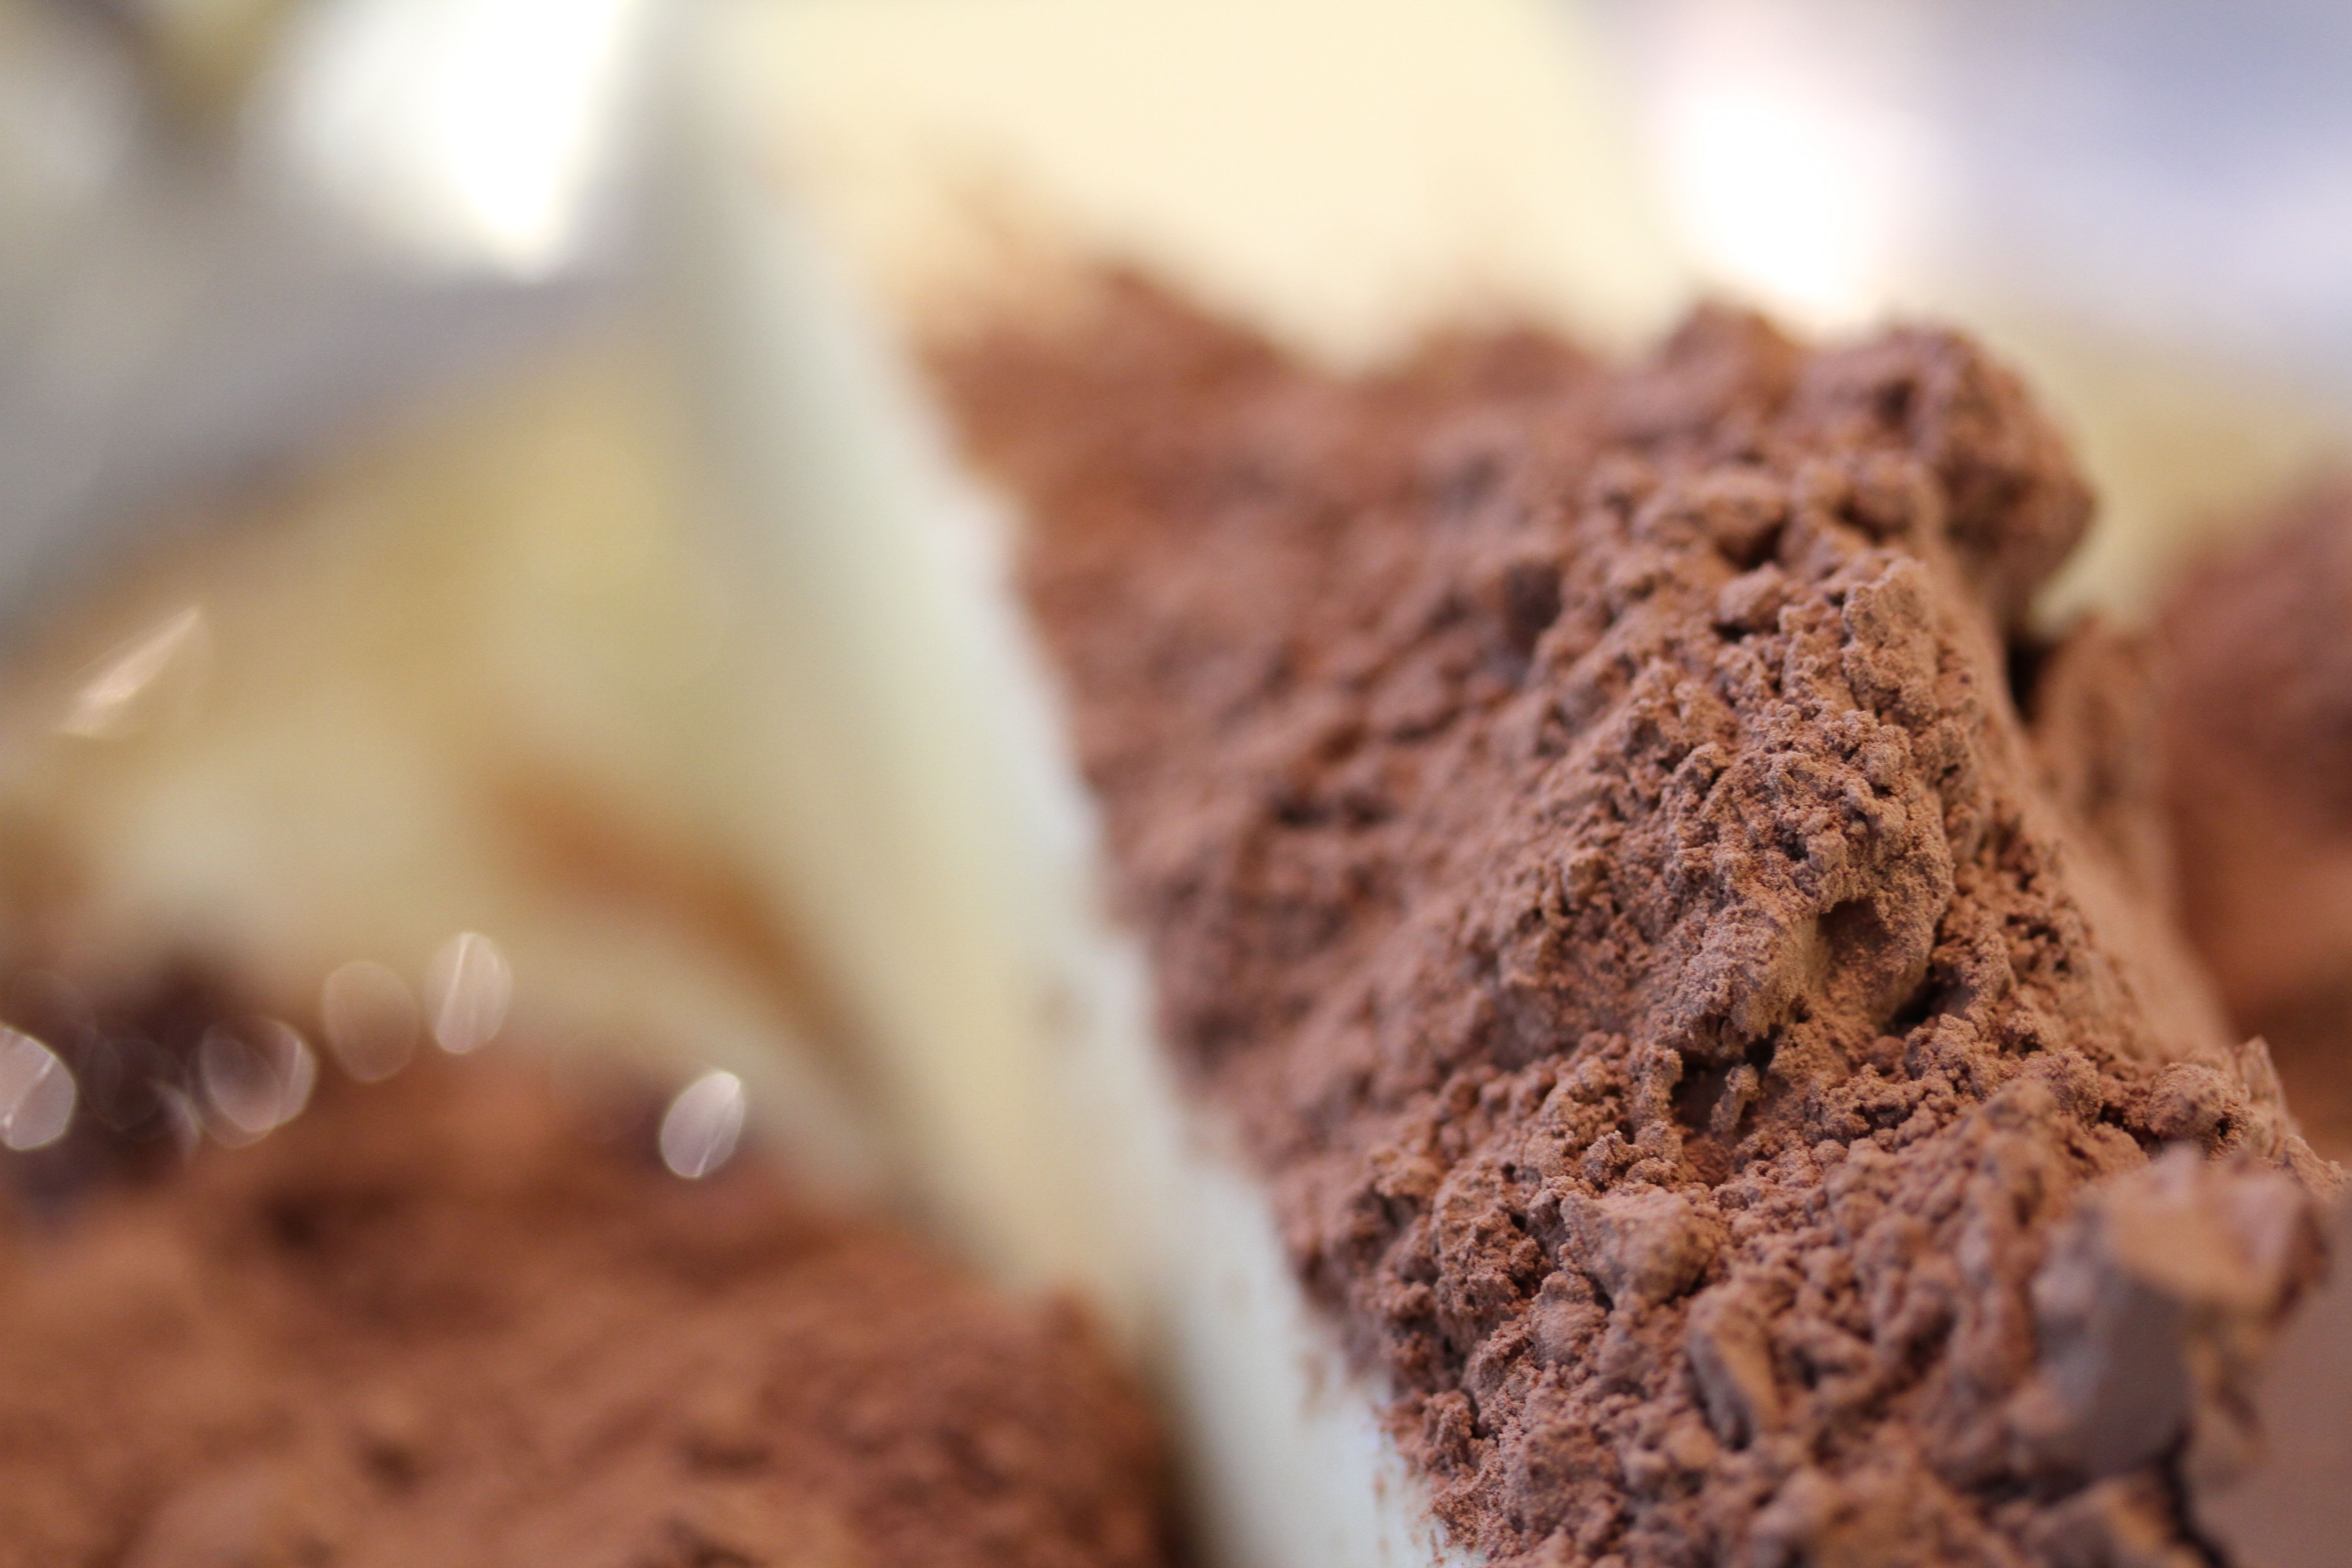 Butter + cocoa powder = (besides yum)...